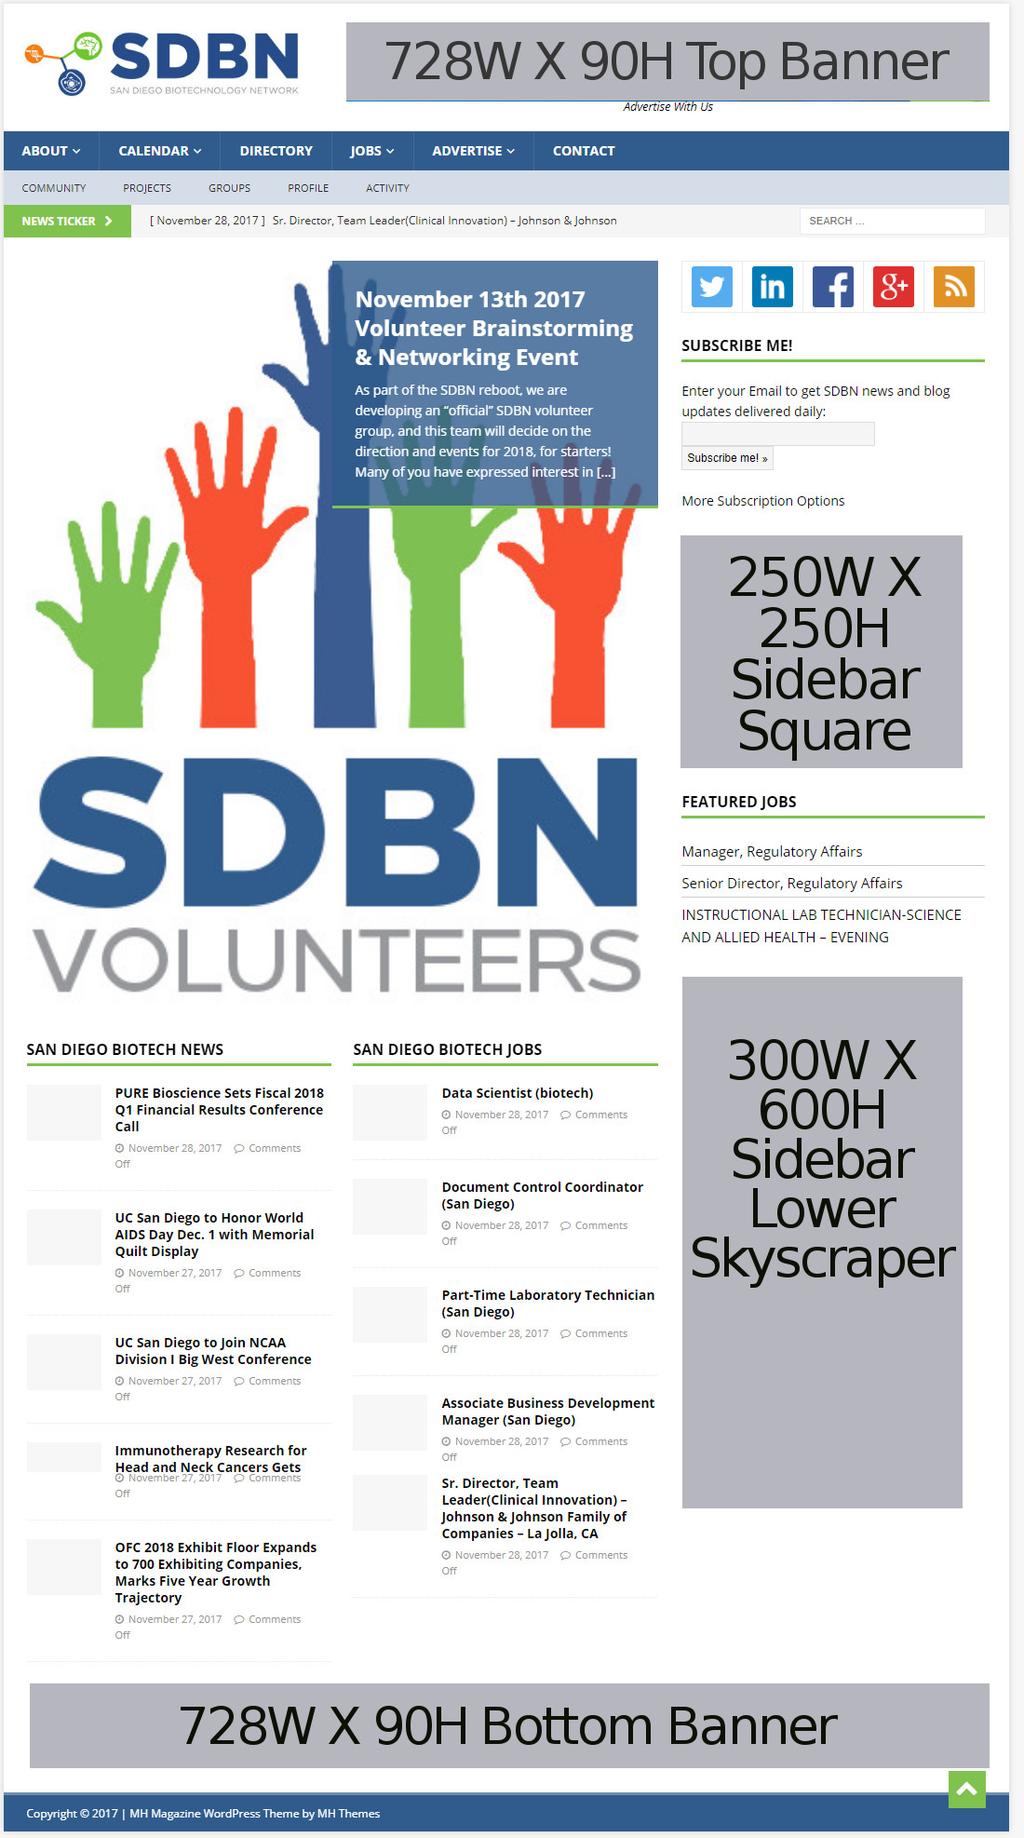 Be heard @ sdbn.org. The SDBN website is a resource for life science professionals featuring local news, biotech jobs, a directory, and local events.